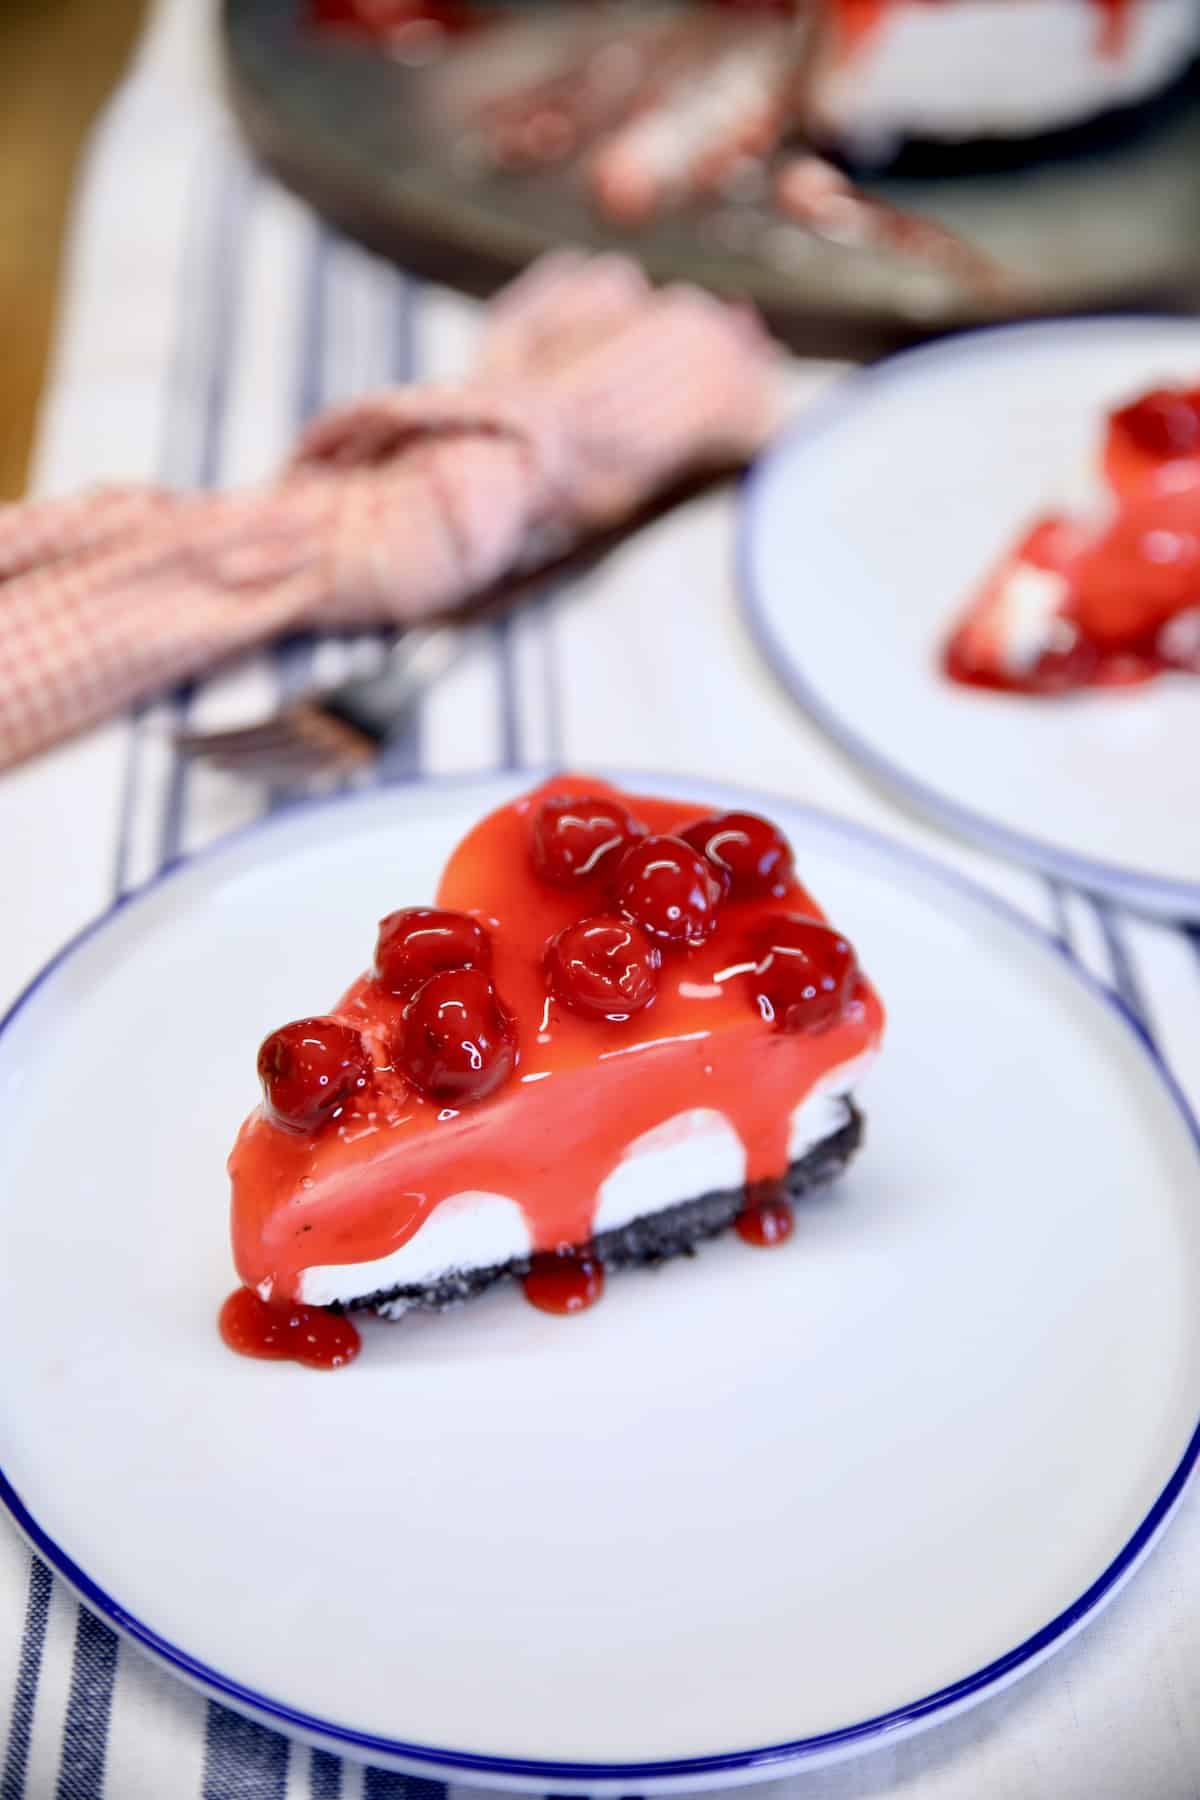 Slice of cherry cheesecake on a plate.